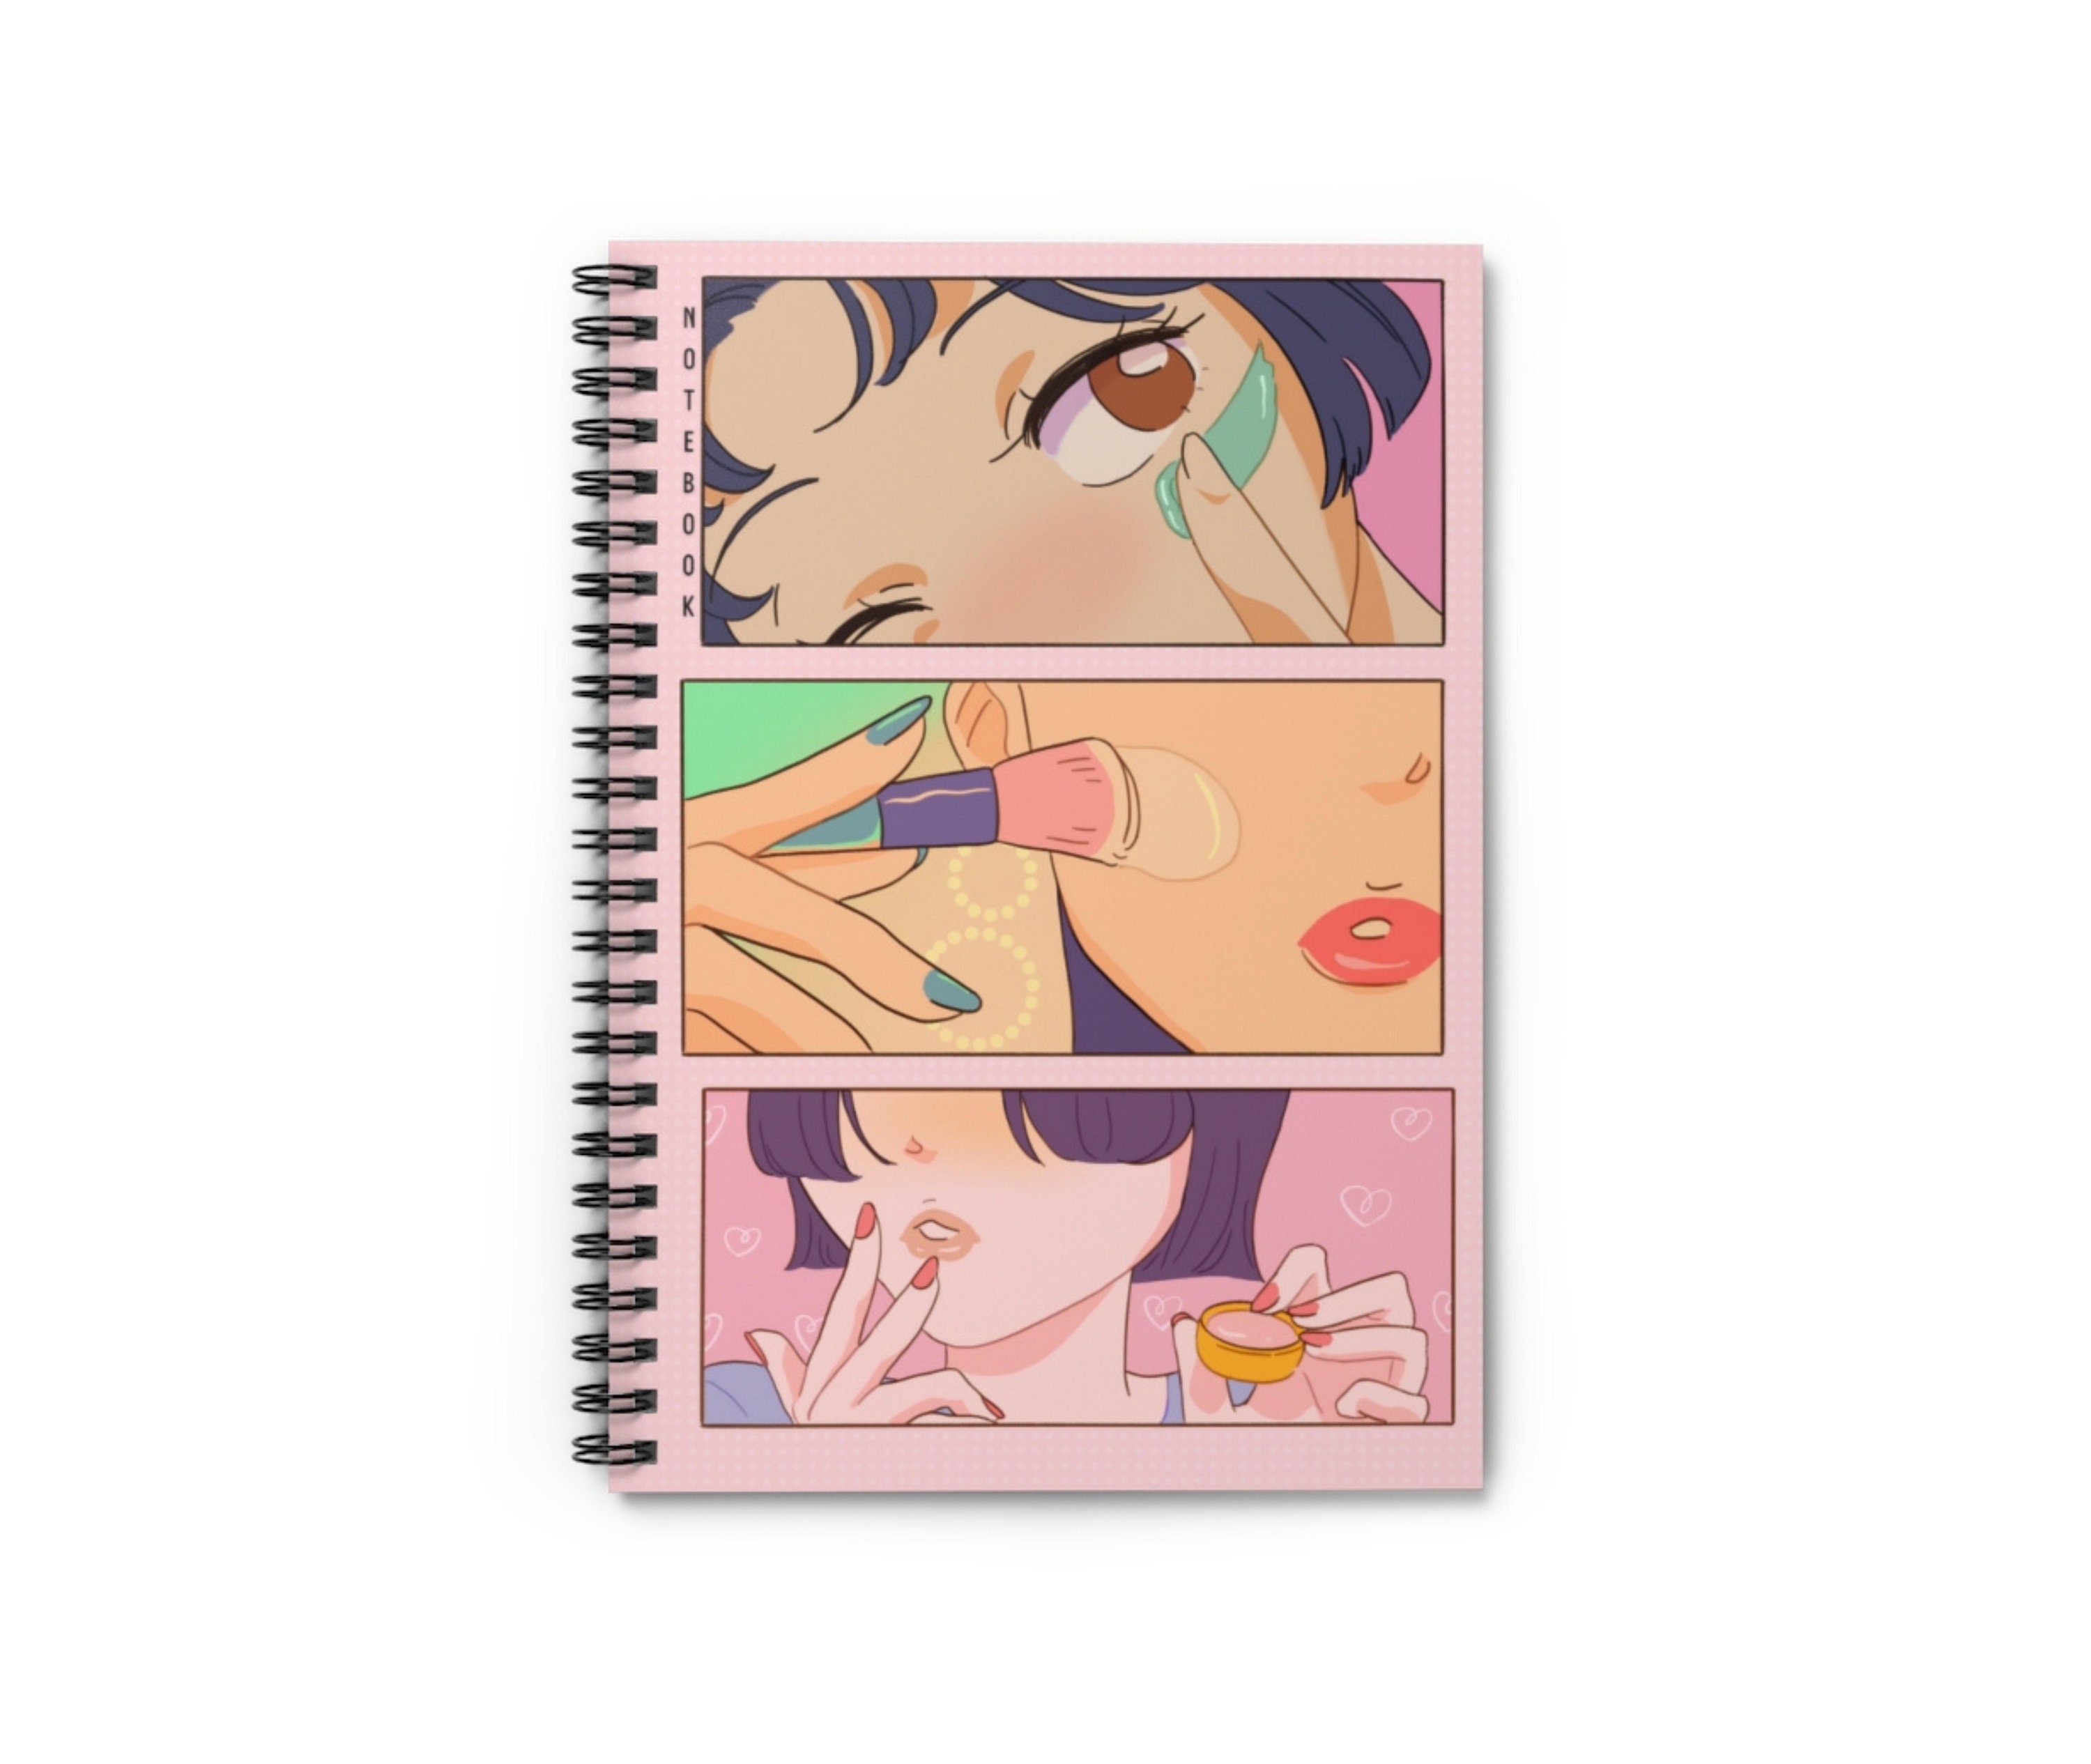 Notebooks Aesthetic Oil Painting Cover Coil Book A5 Sketchbook Journals  Diary Notepad Weekly Planner Office School